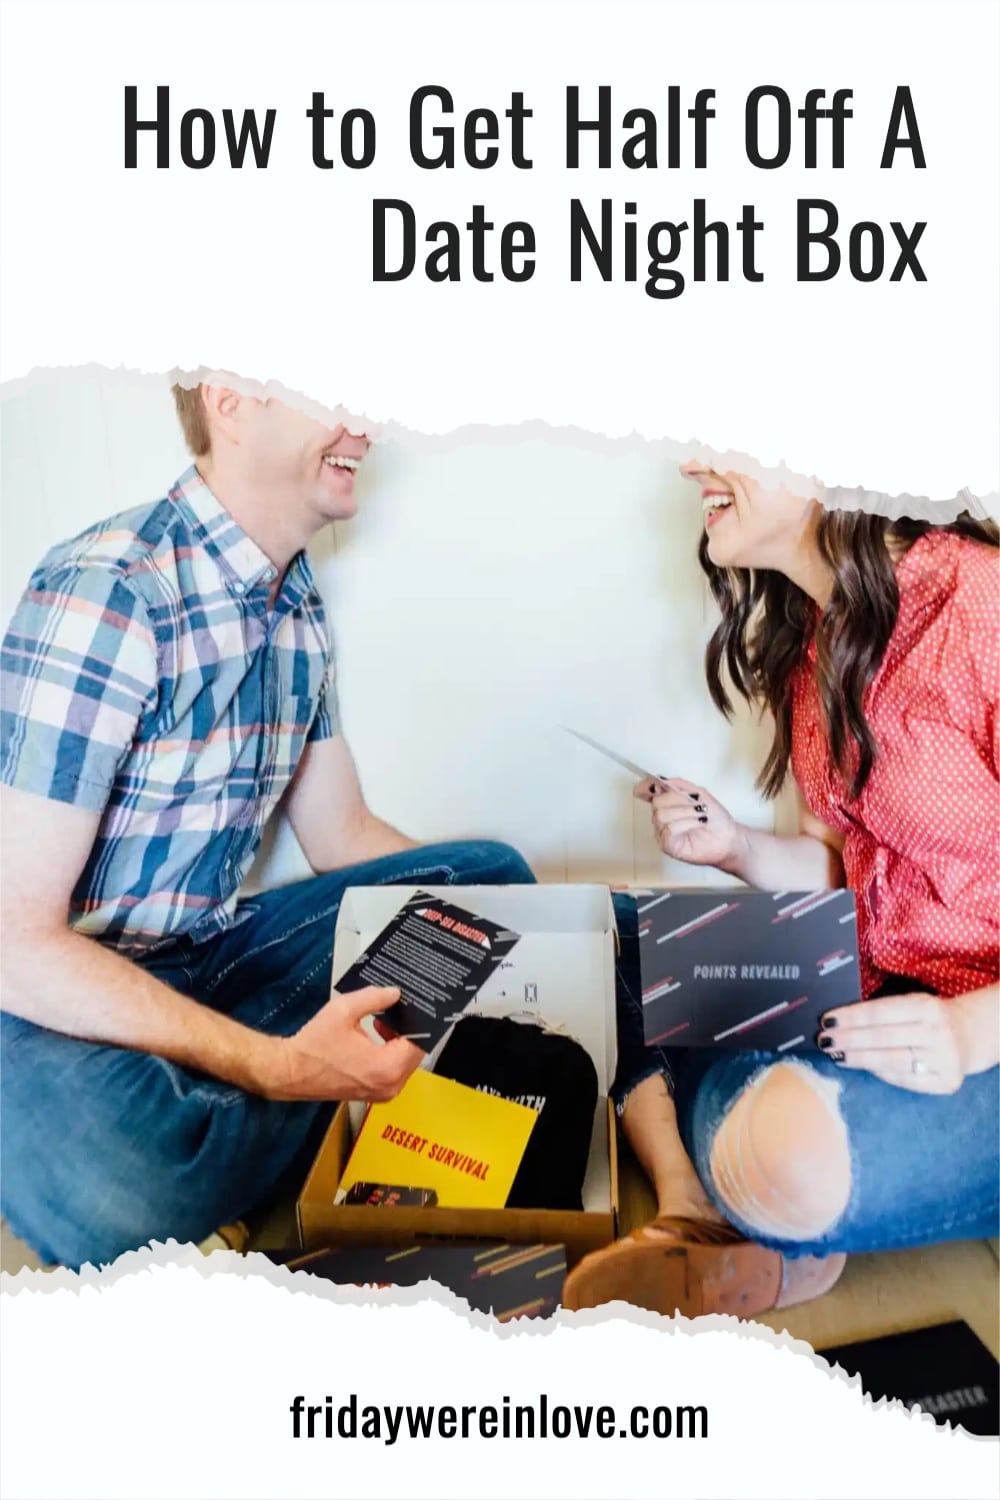 Happily Datebox Review: An Unpaid Happily Co Datebox Review - Friday We ...